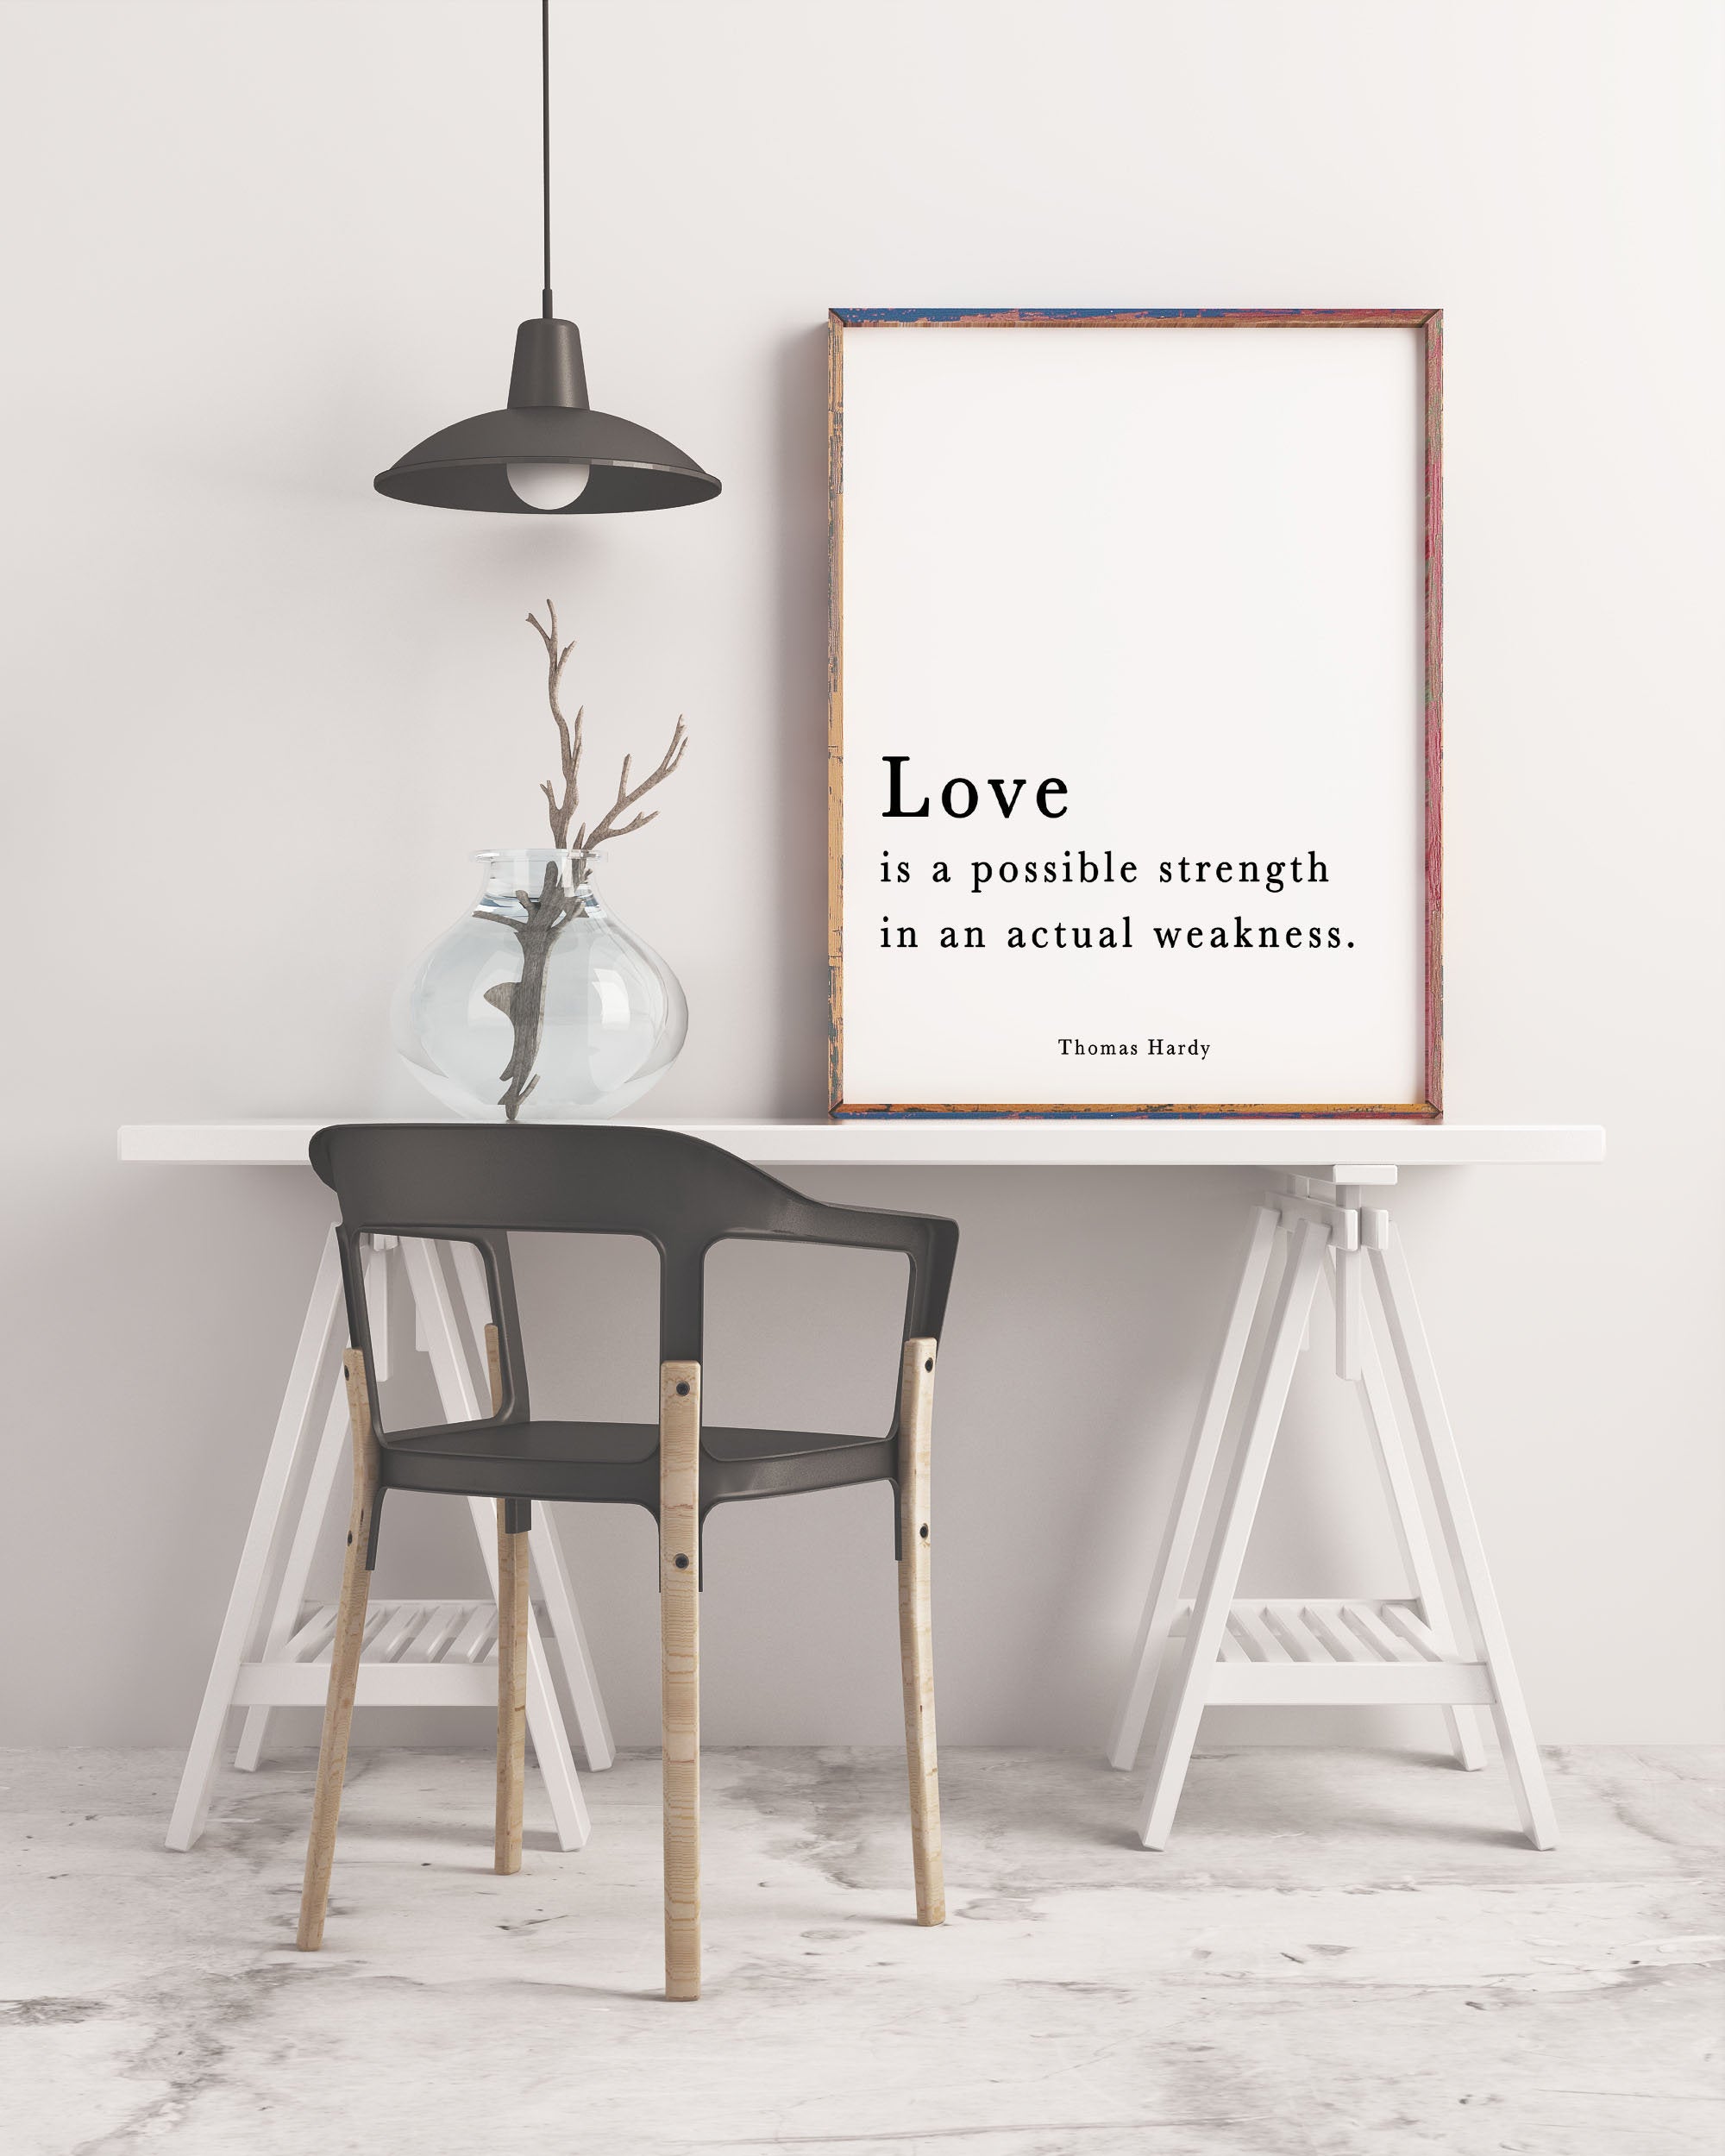 Thomas Hardy Quote Print, Love is a possible strength in an actual weakness, Modern Minimalist Art, Inspirational, Black & White, Unframed - BookQuoteDecor